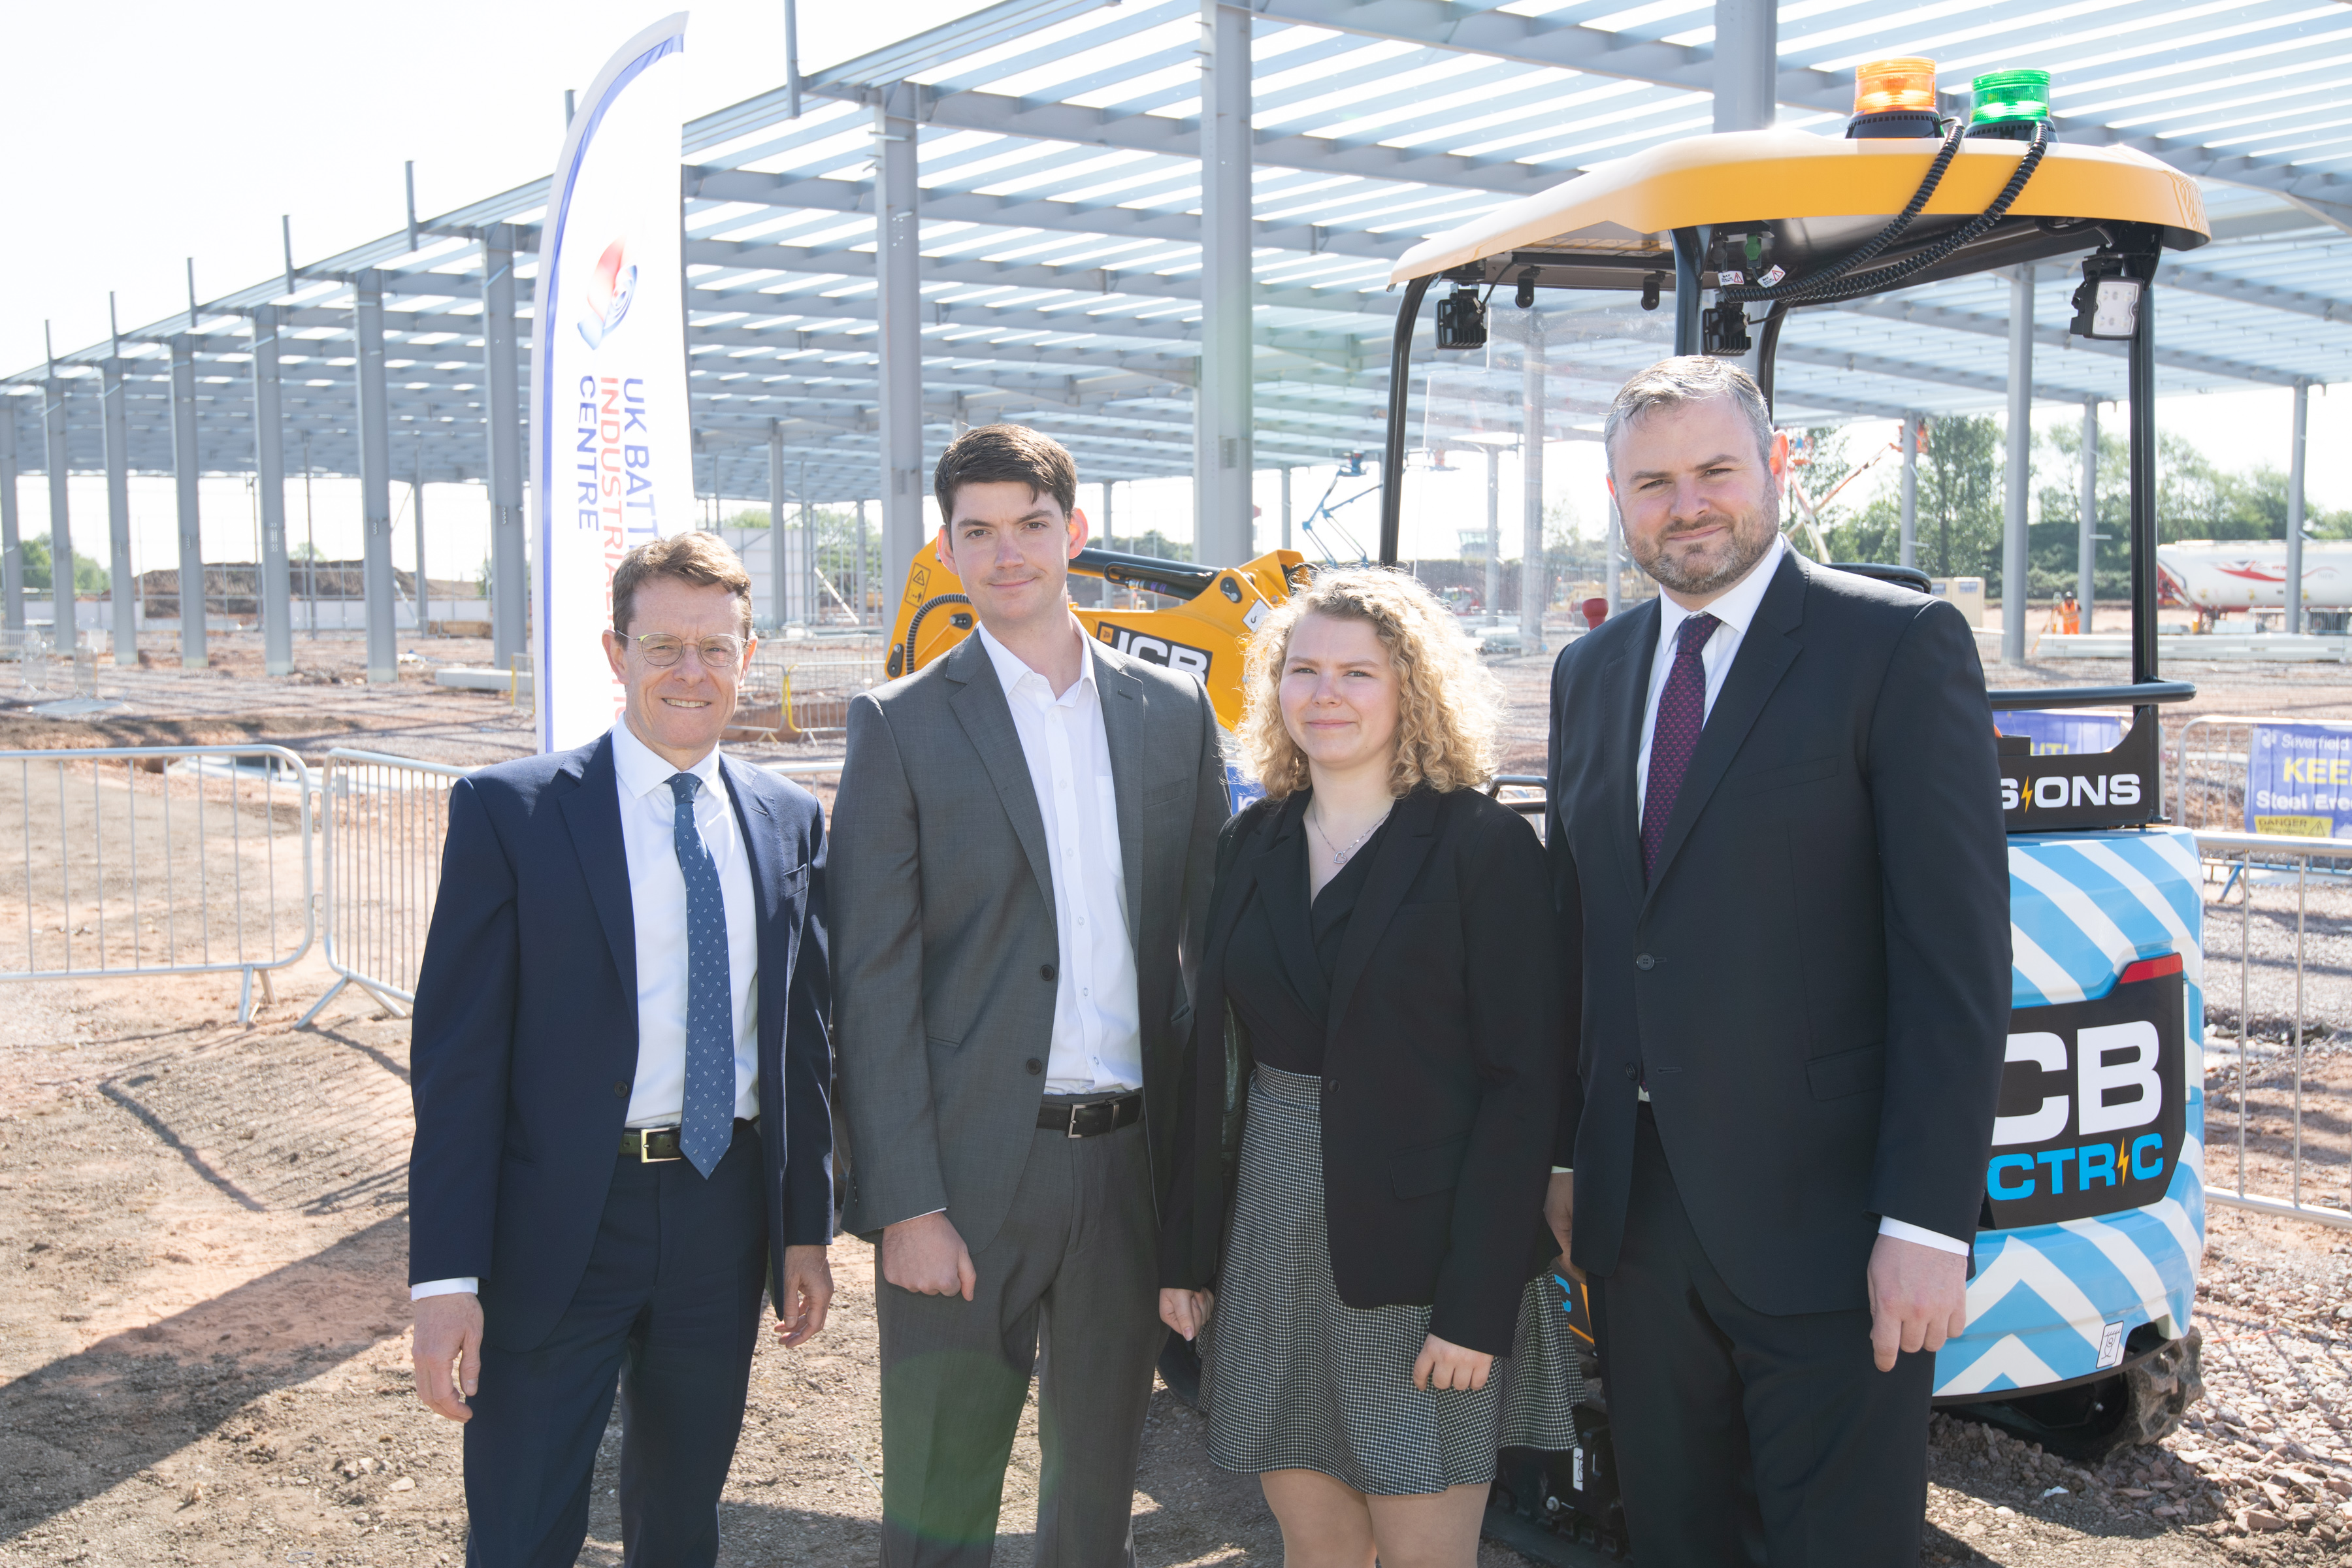 L-R Mayor of the West Midlands Andy Street, George Hull lead engineer at UK Battery Industrialisation Centre, Eve Wheeler-Jones PhD student at WMG, and then Minister for Business and Industry Andrew Stephenson at the UK Battery Industrialisation Centre under construction in Coventry, pictured at the launch of the Local Industrial Strategy